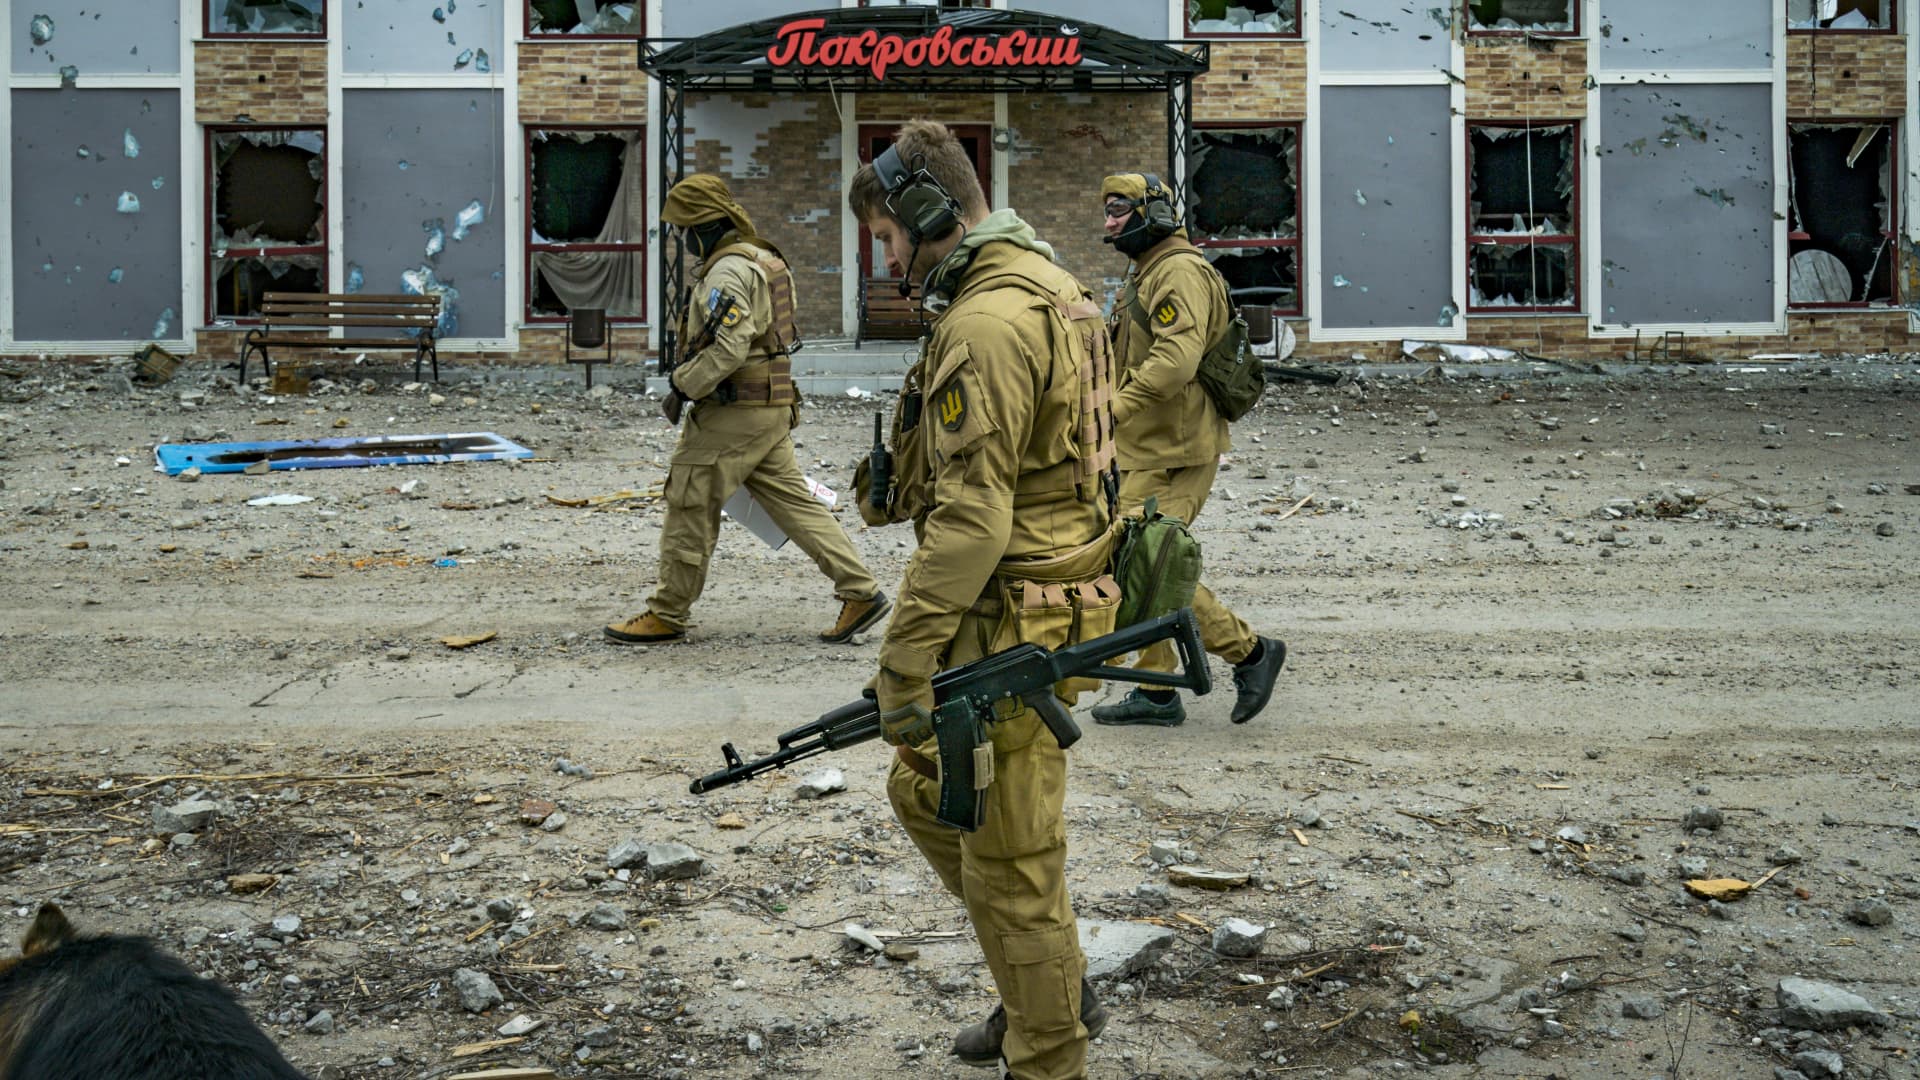 Ukrainian soldiers patrol in the frontline of Mykolaiv surrounded of the destruction after the Russian shelling over a village in Ukraine. Ukrainian President Volodymyr Zelenskyy said in his nightly video address that Russia has rejected an Easter truce proposal.